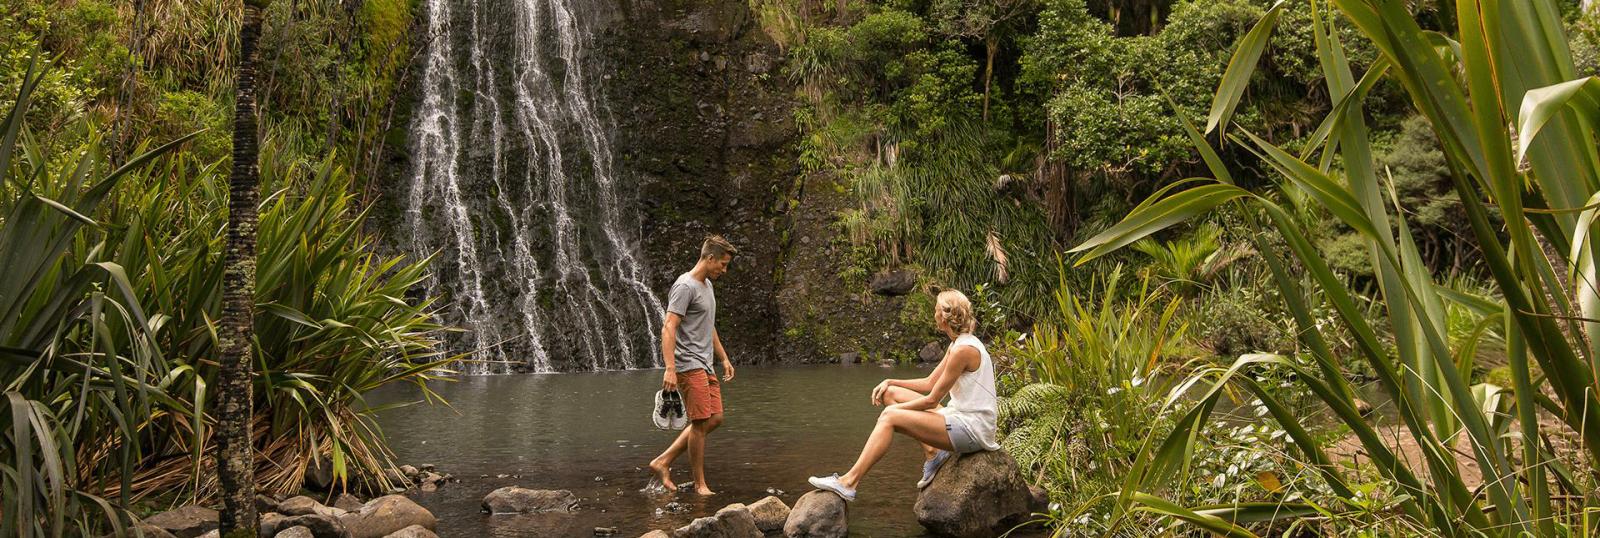 Couple enjoying resting by a beautiful waterfall during their South Island hike.